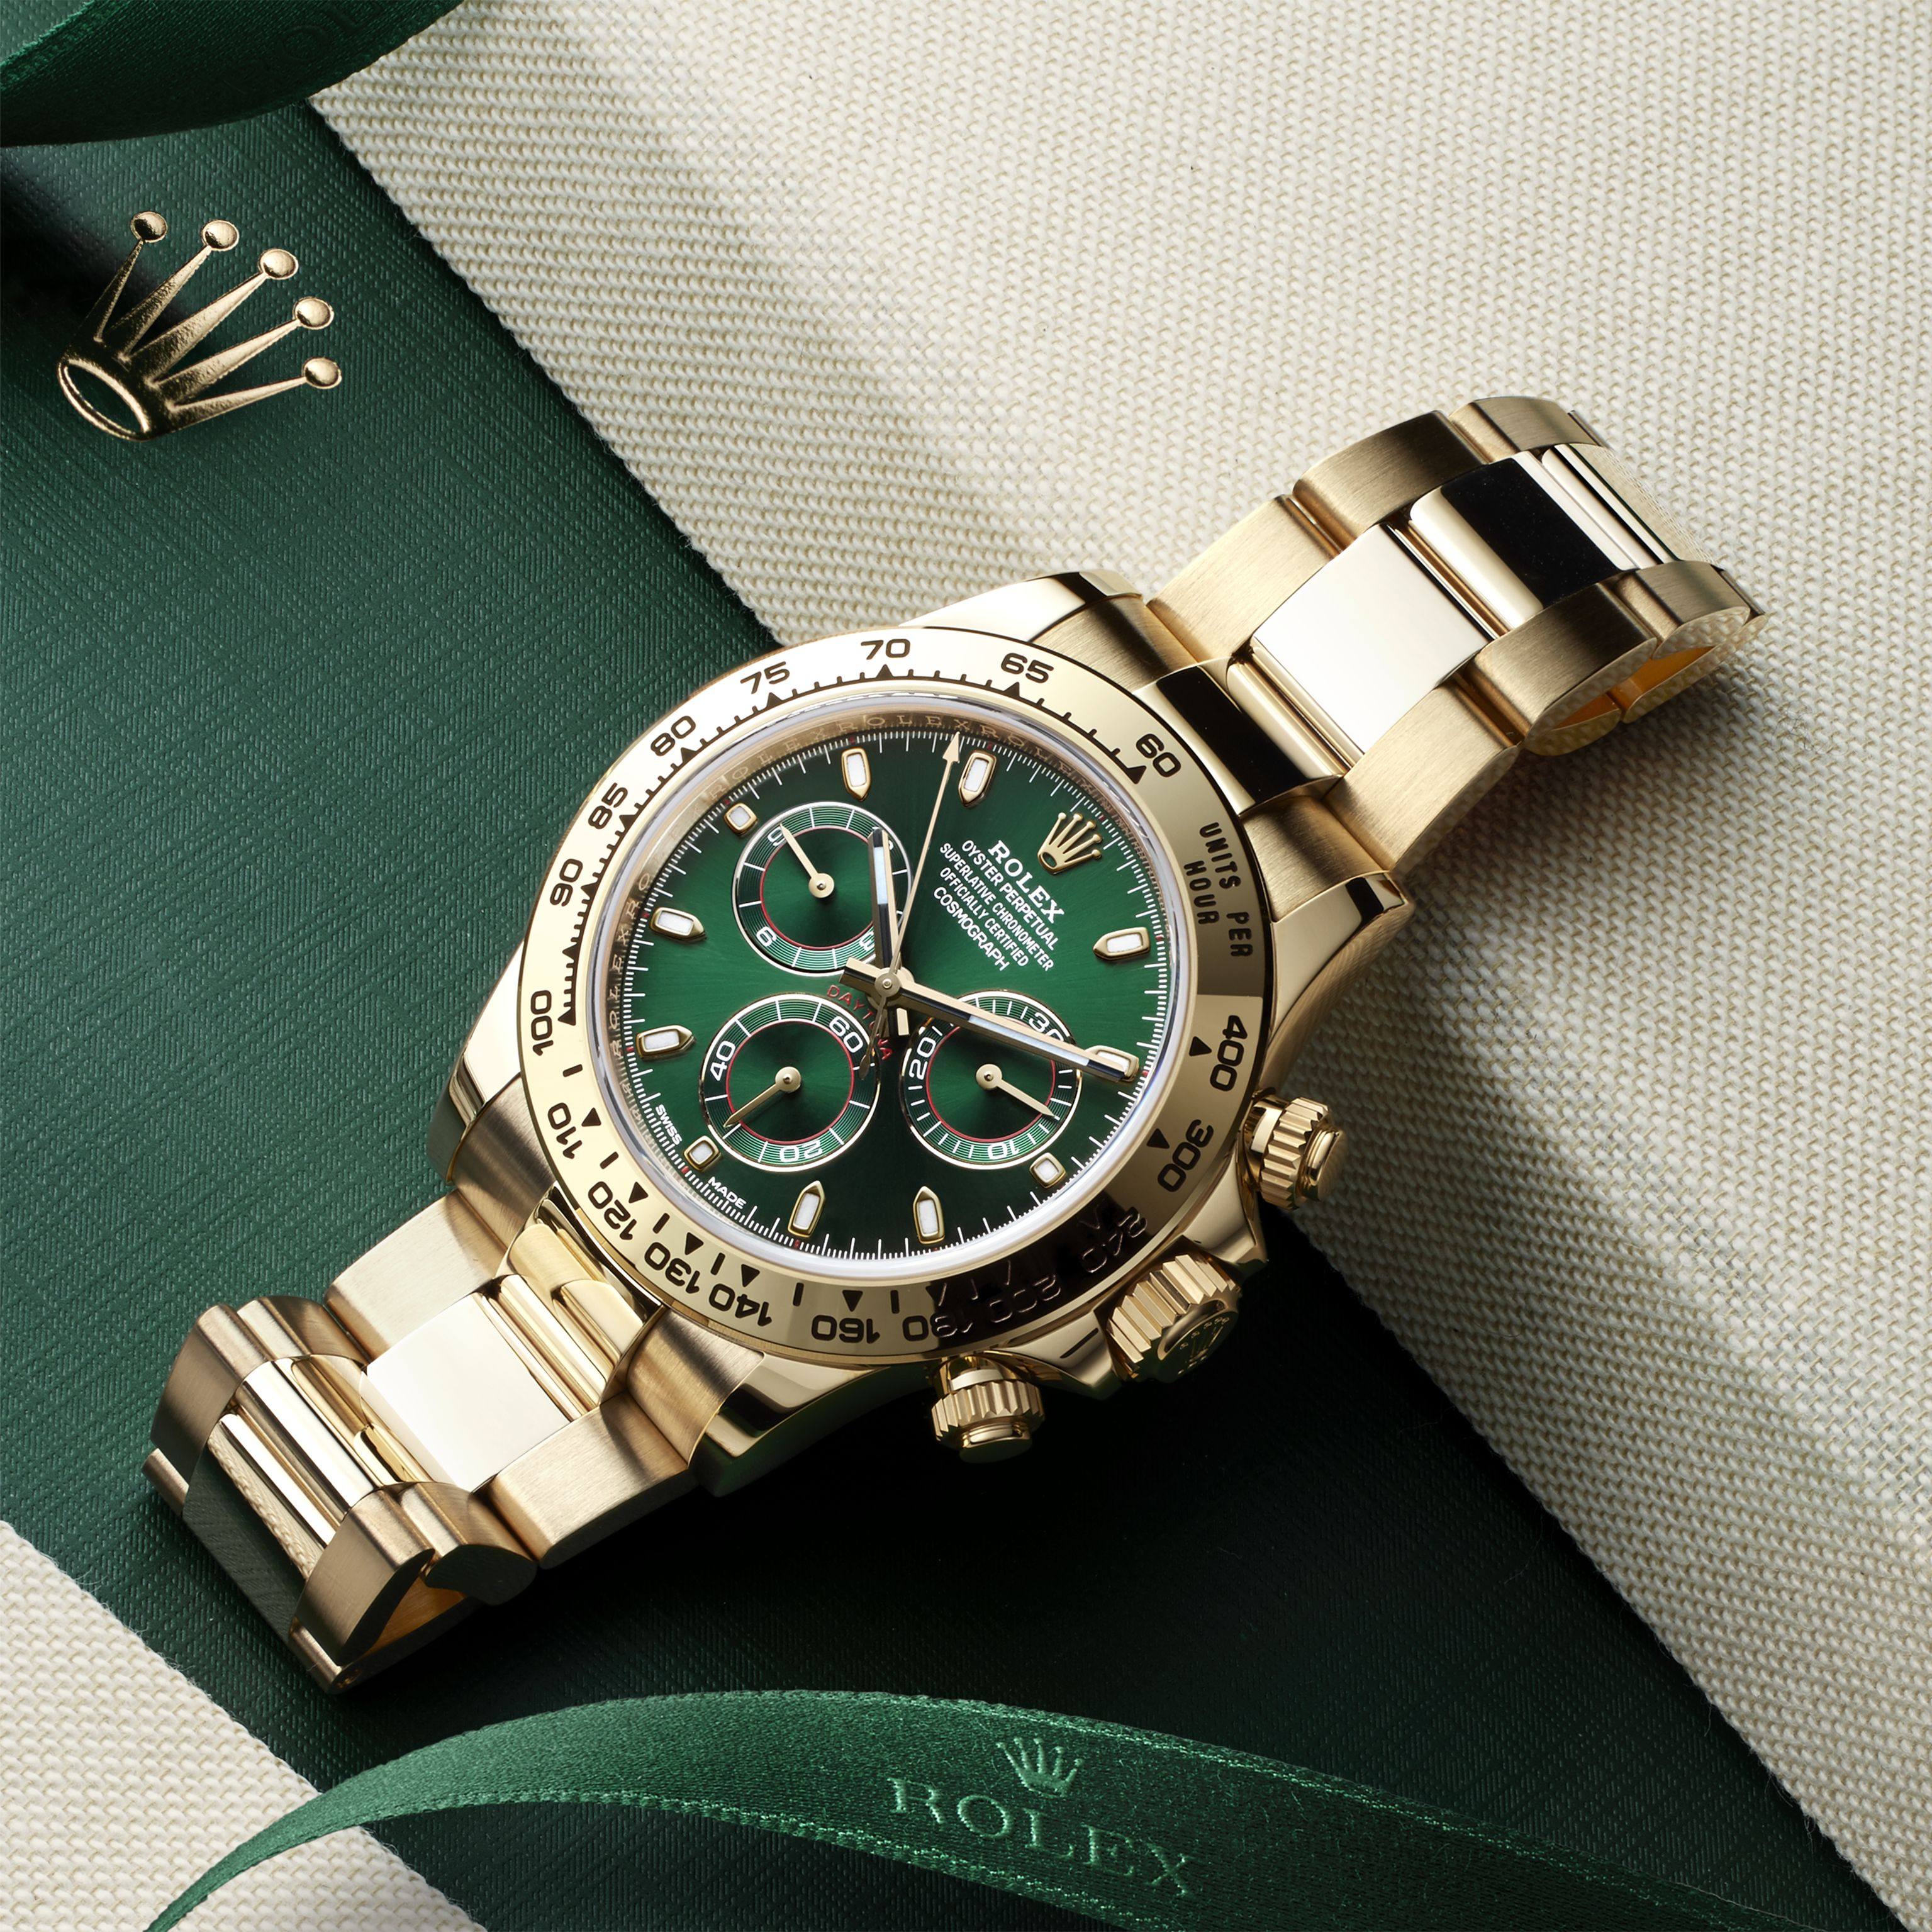 The great Rolex recession may be upon us, as higher interest rates spark fears of an economic downturn. Photo: Rolex